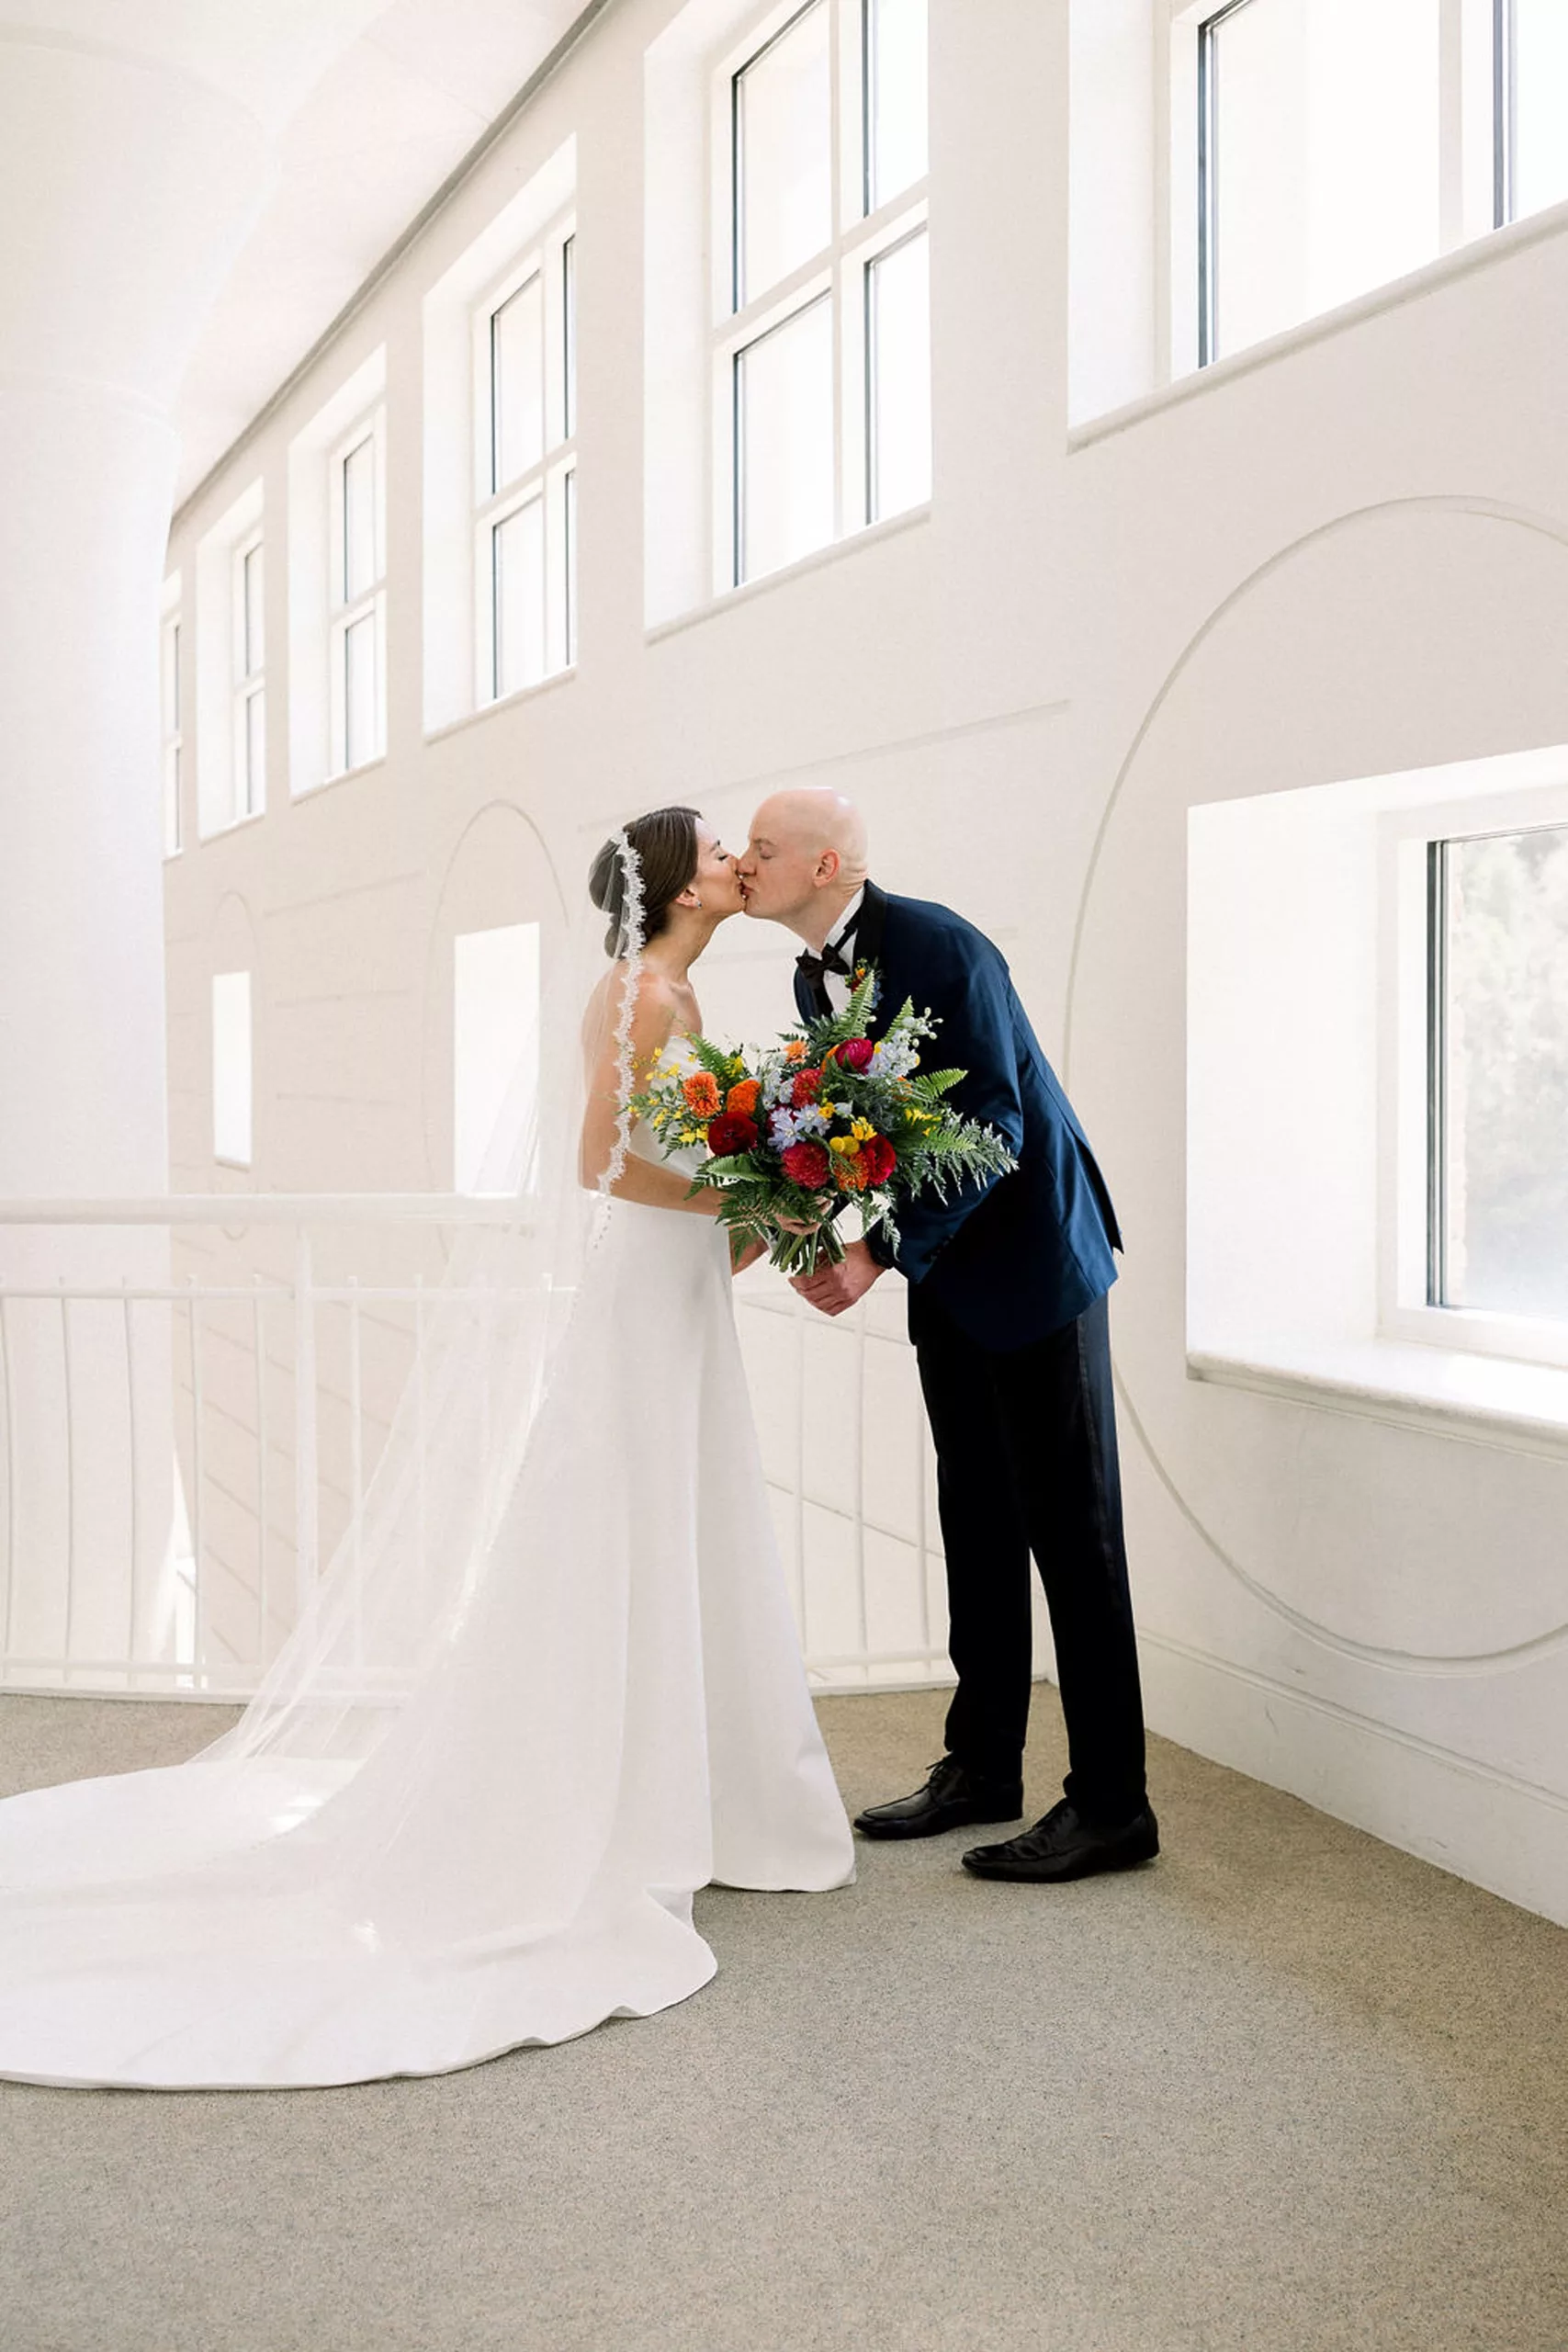 Newlyweds kiss while standing by large windows in a museum